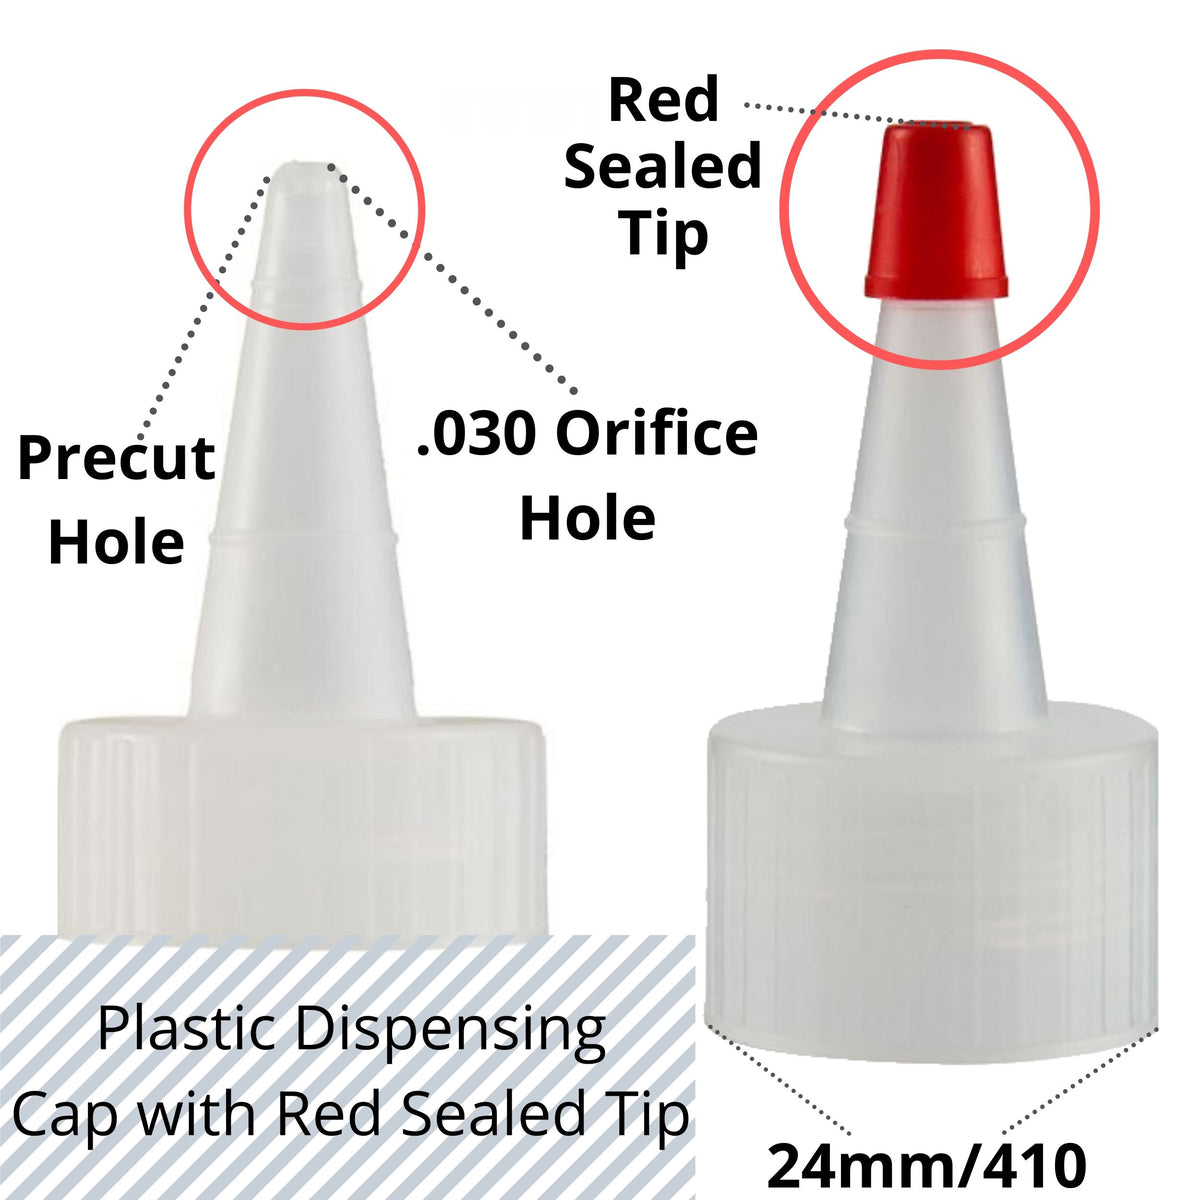 Replacement Caps for Plastic Squeeze Bottles kelkaa Caps 28/410 Natural Long Red Tip Yorker Caps with .030 Orifice Hole Pack of 12 Dispensing Caps 